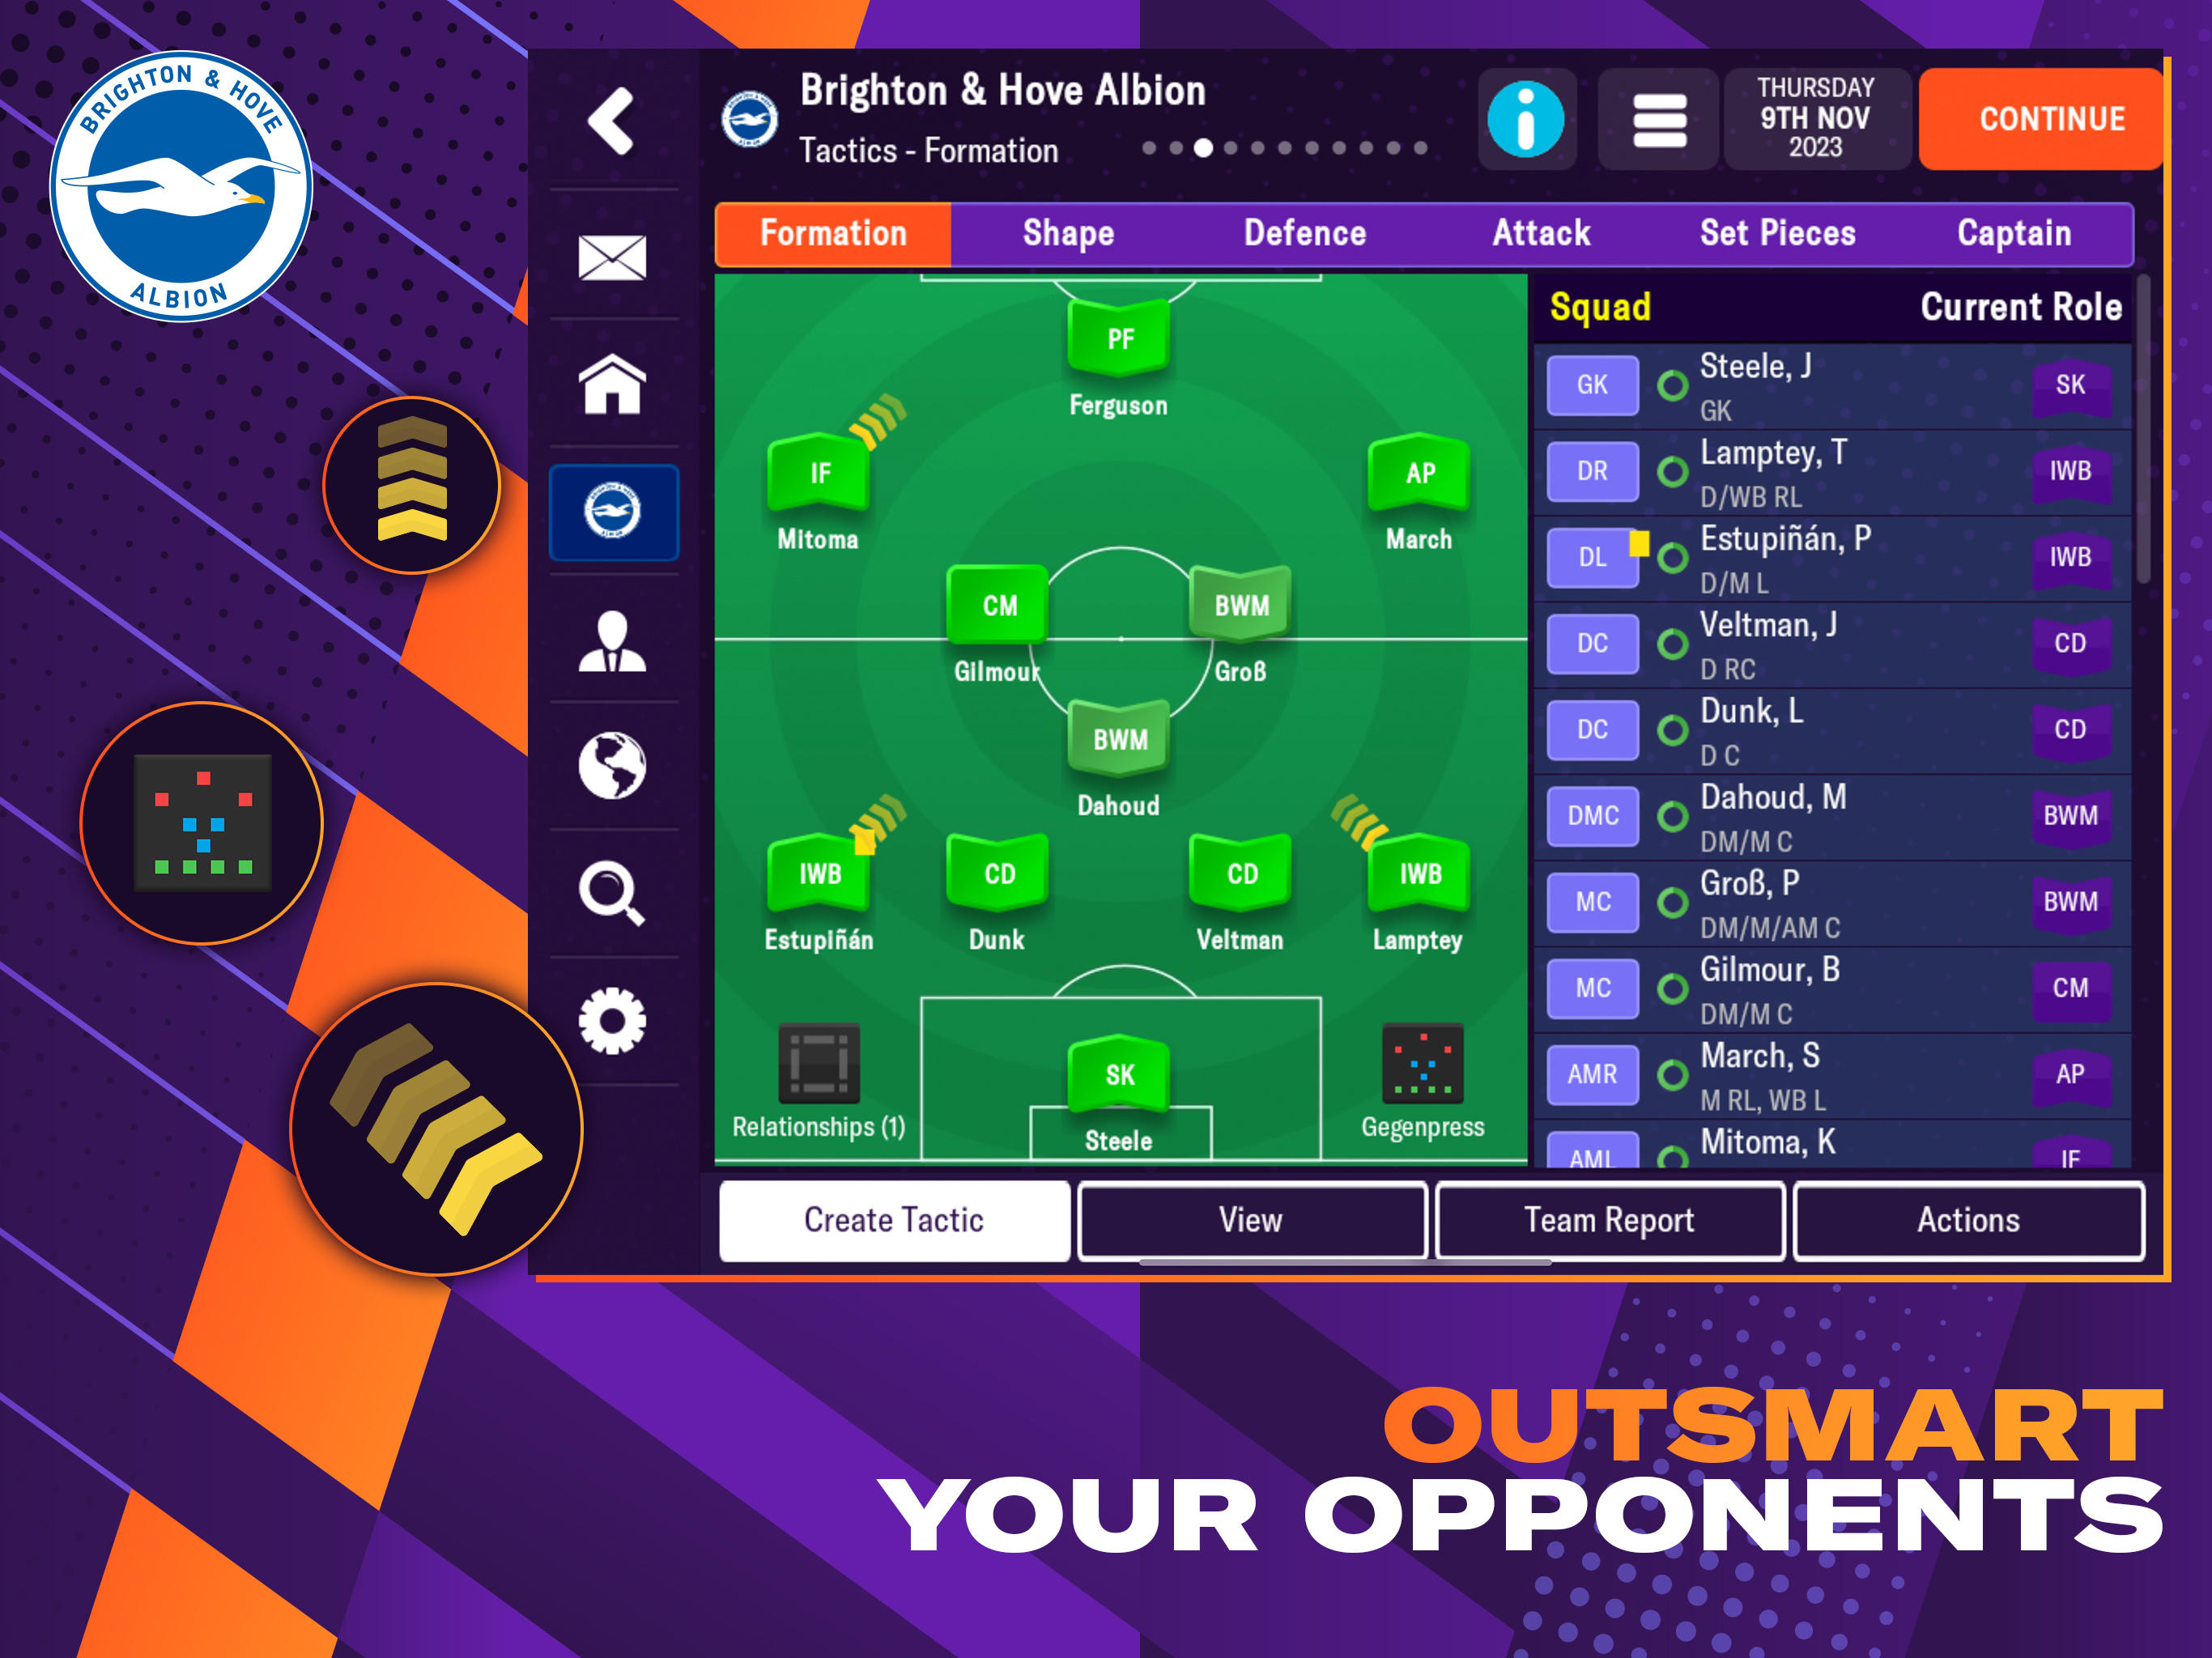 Football Manager 2022 Mobile Download APK for Android (Free)